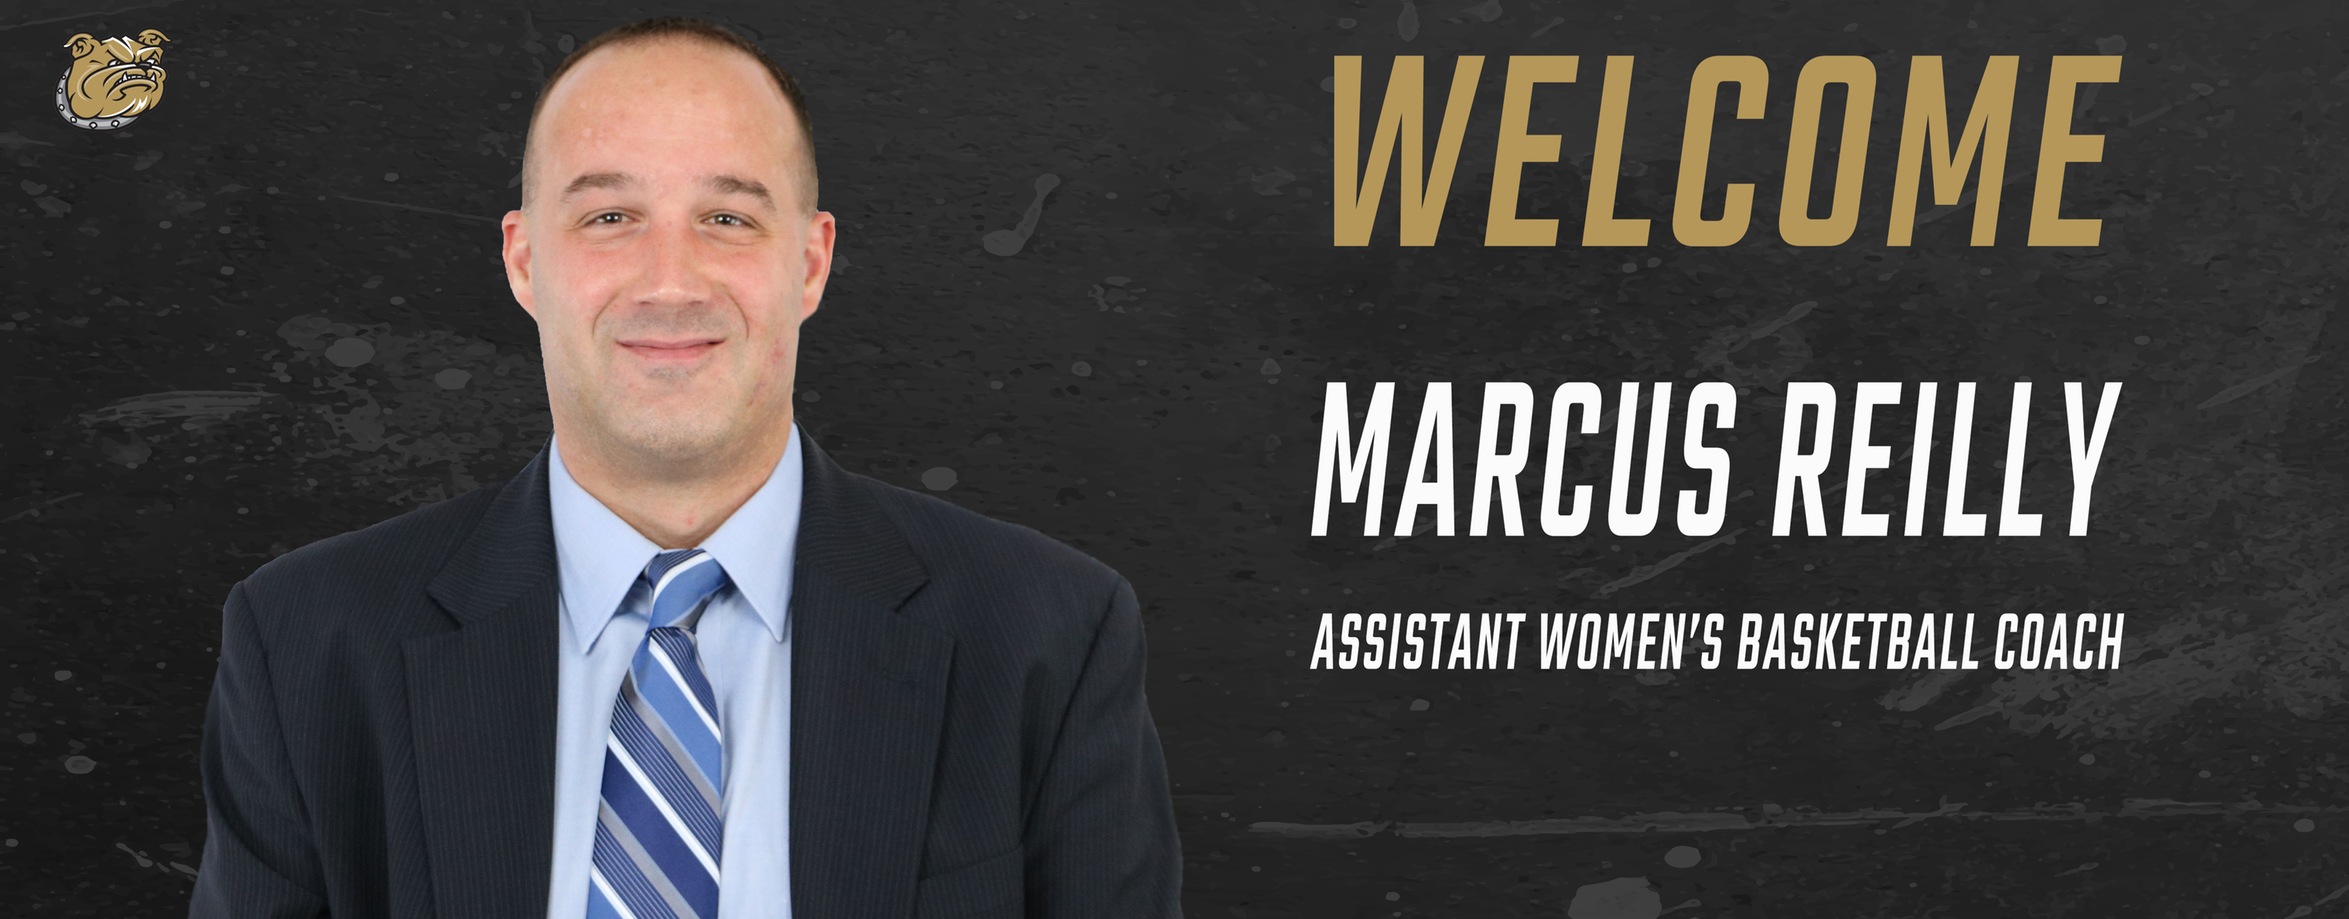 Bryant welcomes Marcus Reilly to women's basketball staff